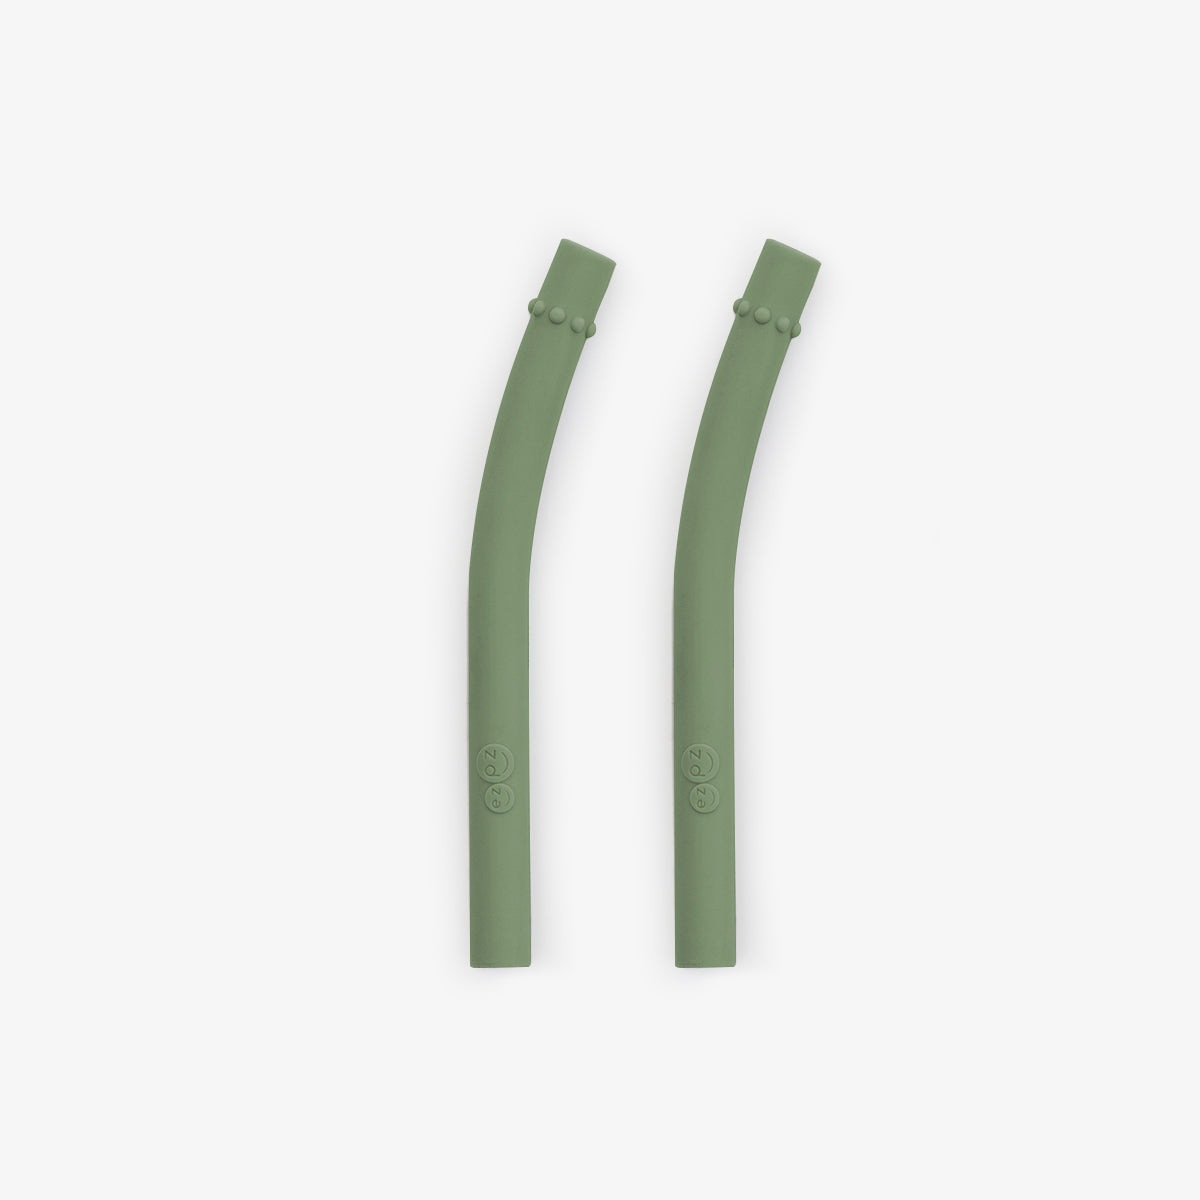 Mini Straws in Olive / Silicone Straw Replacement Pack for the ezpz Mini Cup & Straw System